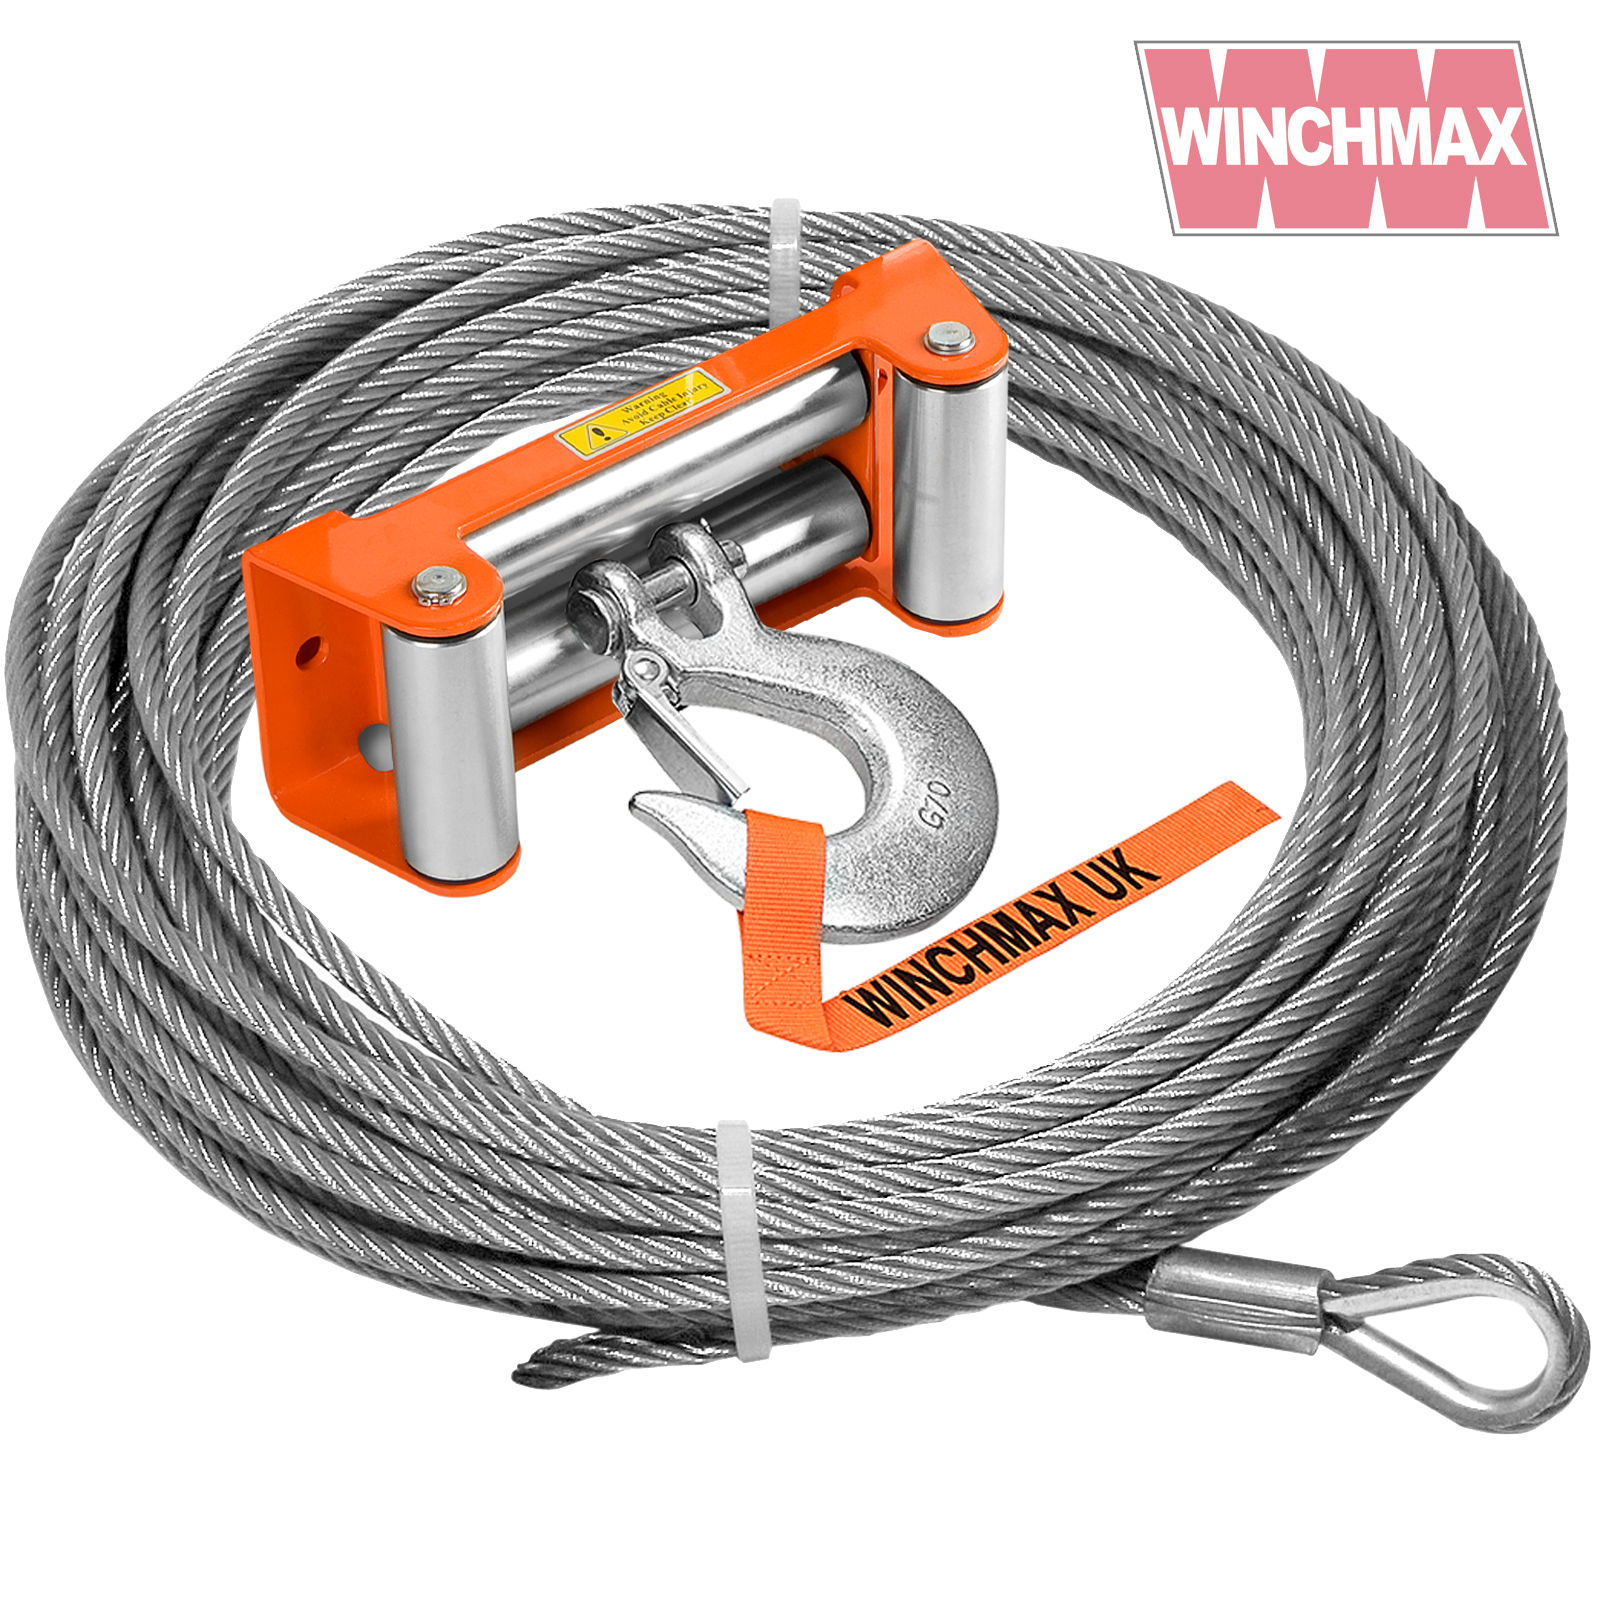 Steel Rope 26m X 12mm, Hole Fix. Roller Fairlead. 1/2 Inch Clevis Hook. For  winches up to 17,500lb. - Winchmax